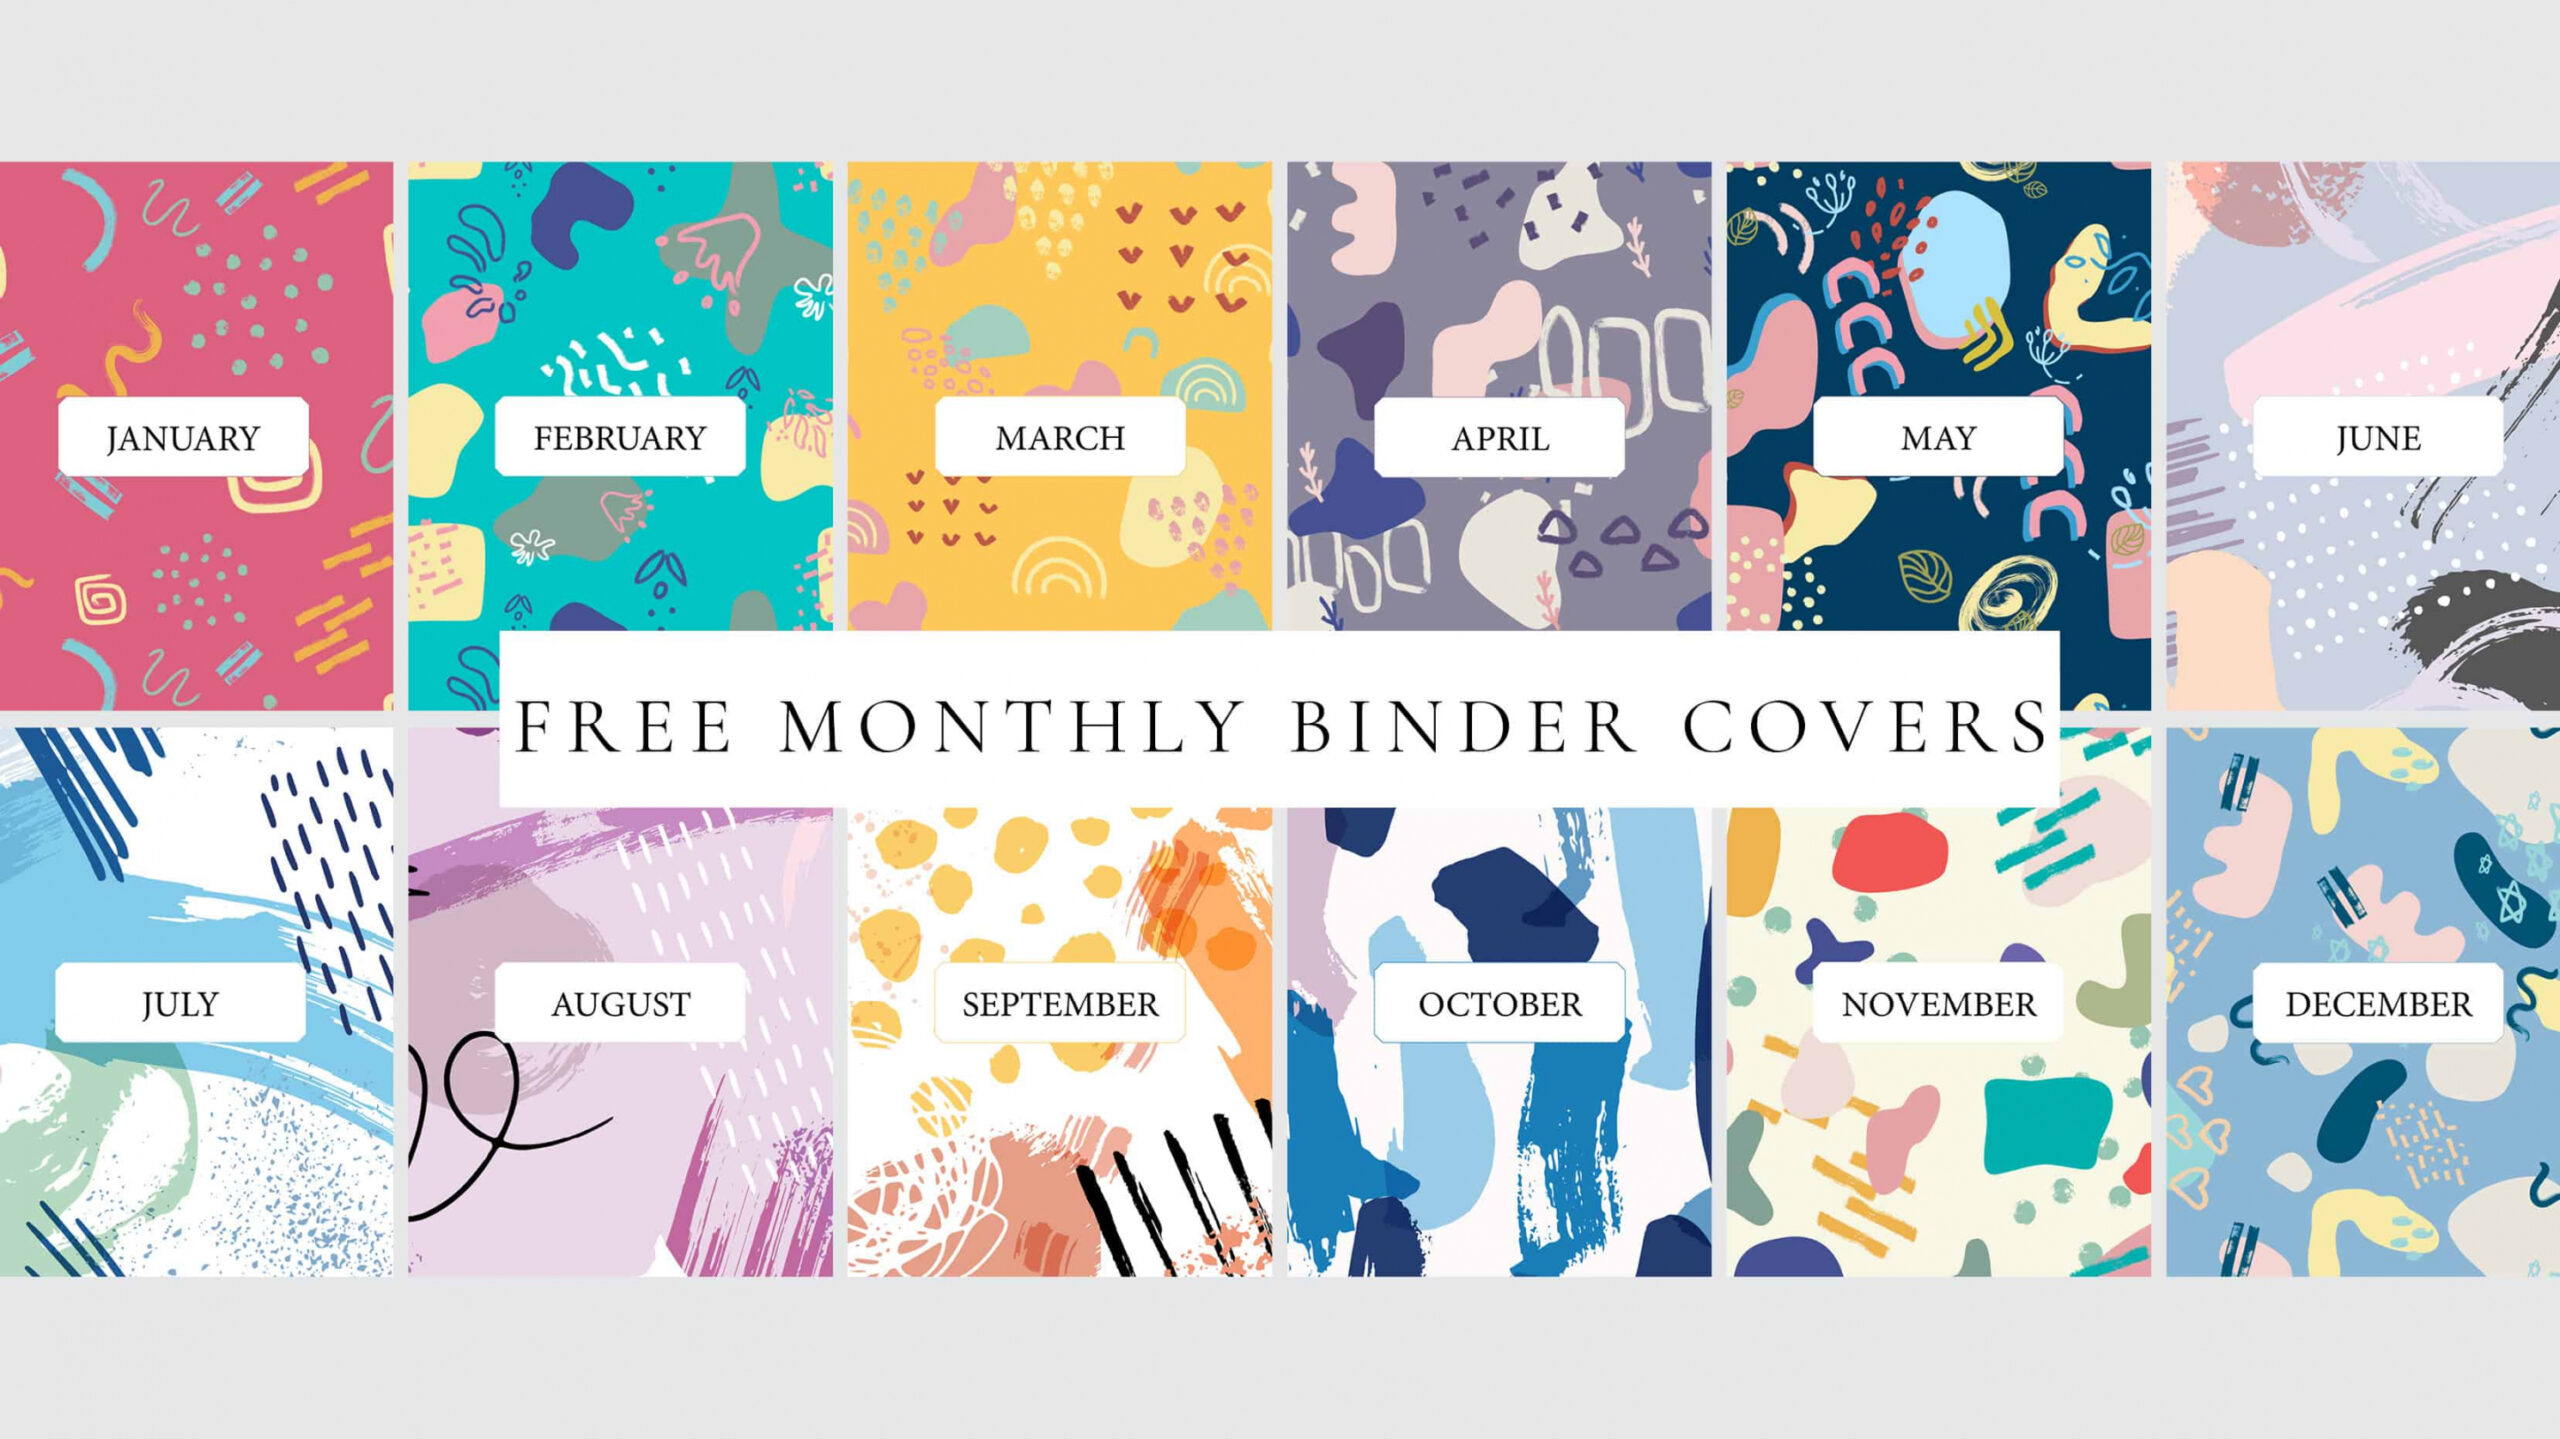 FREE Printable Monthly Binder Covers - My Printable Home - FREE Printables - Free Printable Binder Covers